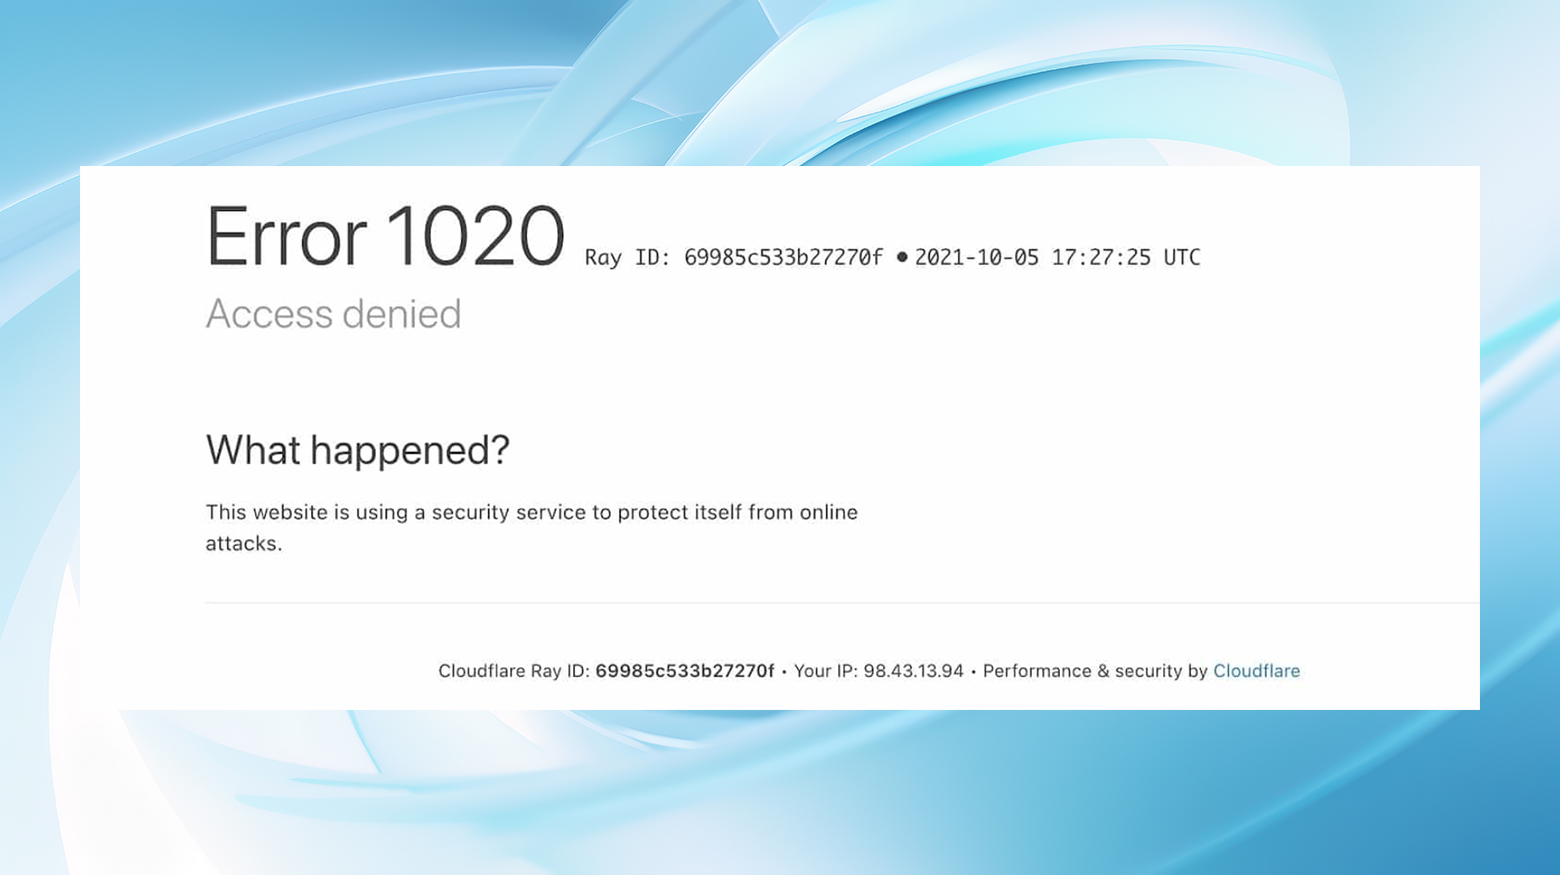 Error code 1020 as it appears with a Cloudflare Ray ID and time stamp.